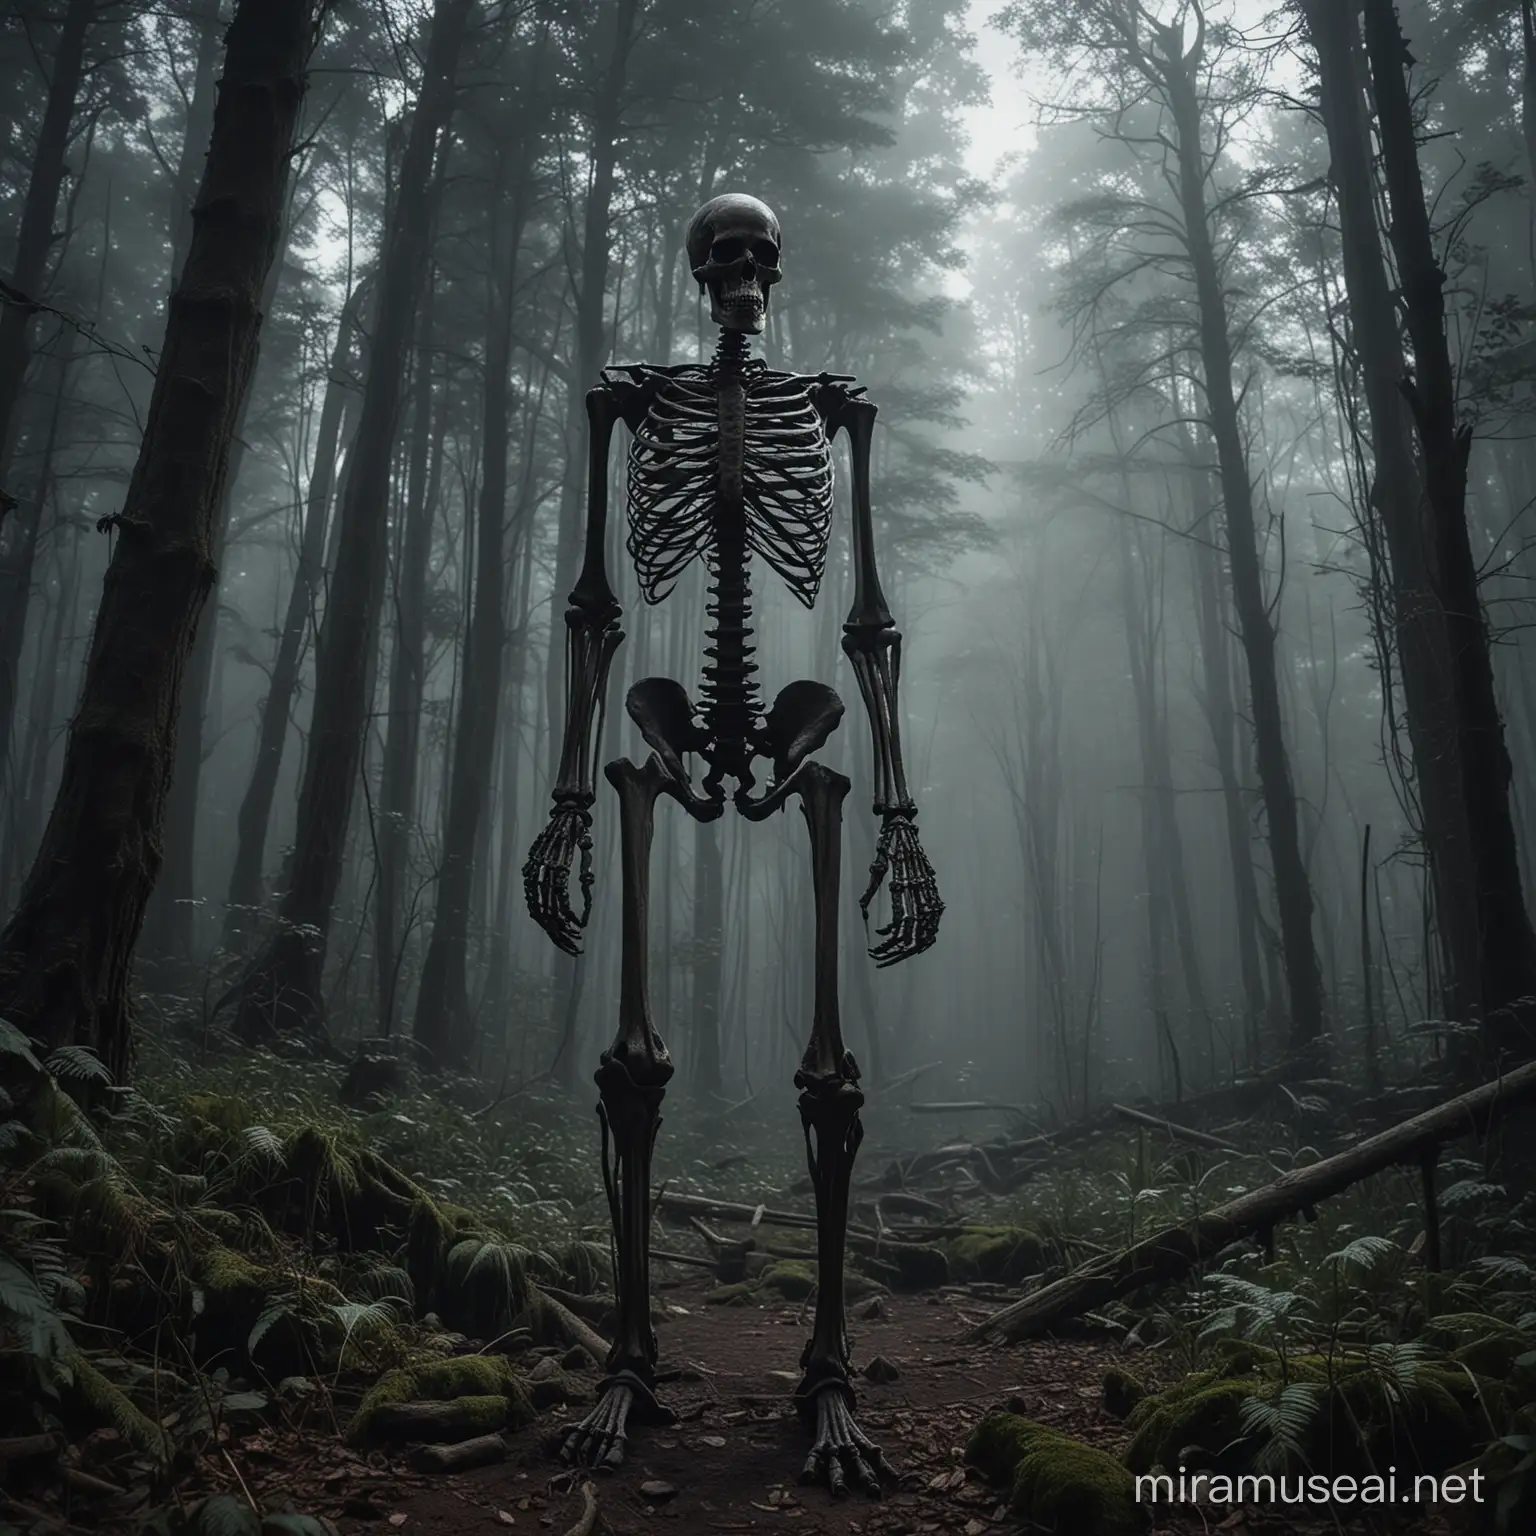 Giant Skeleton of Ad Dark and Mysterious Forest Encounter